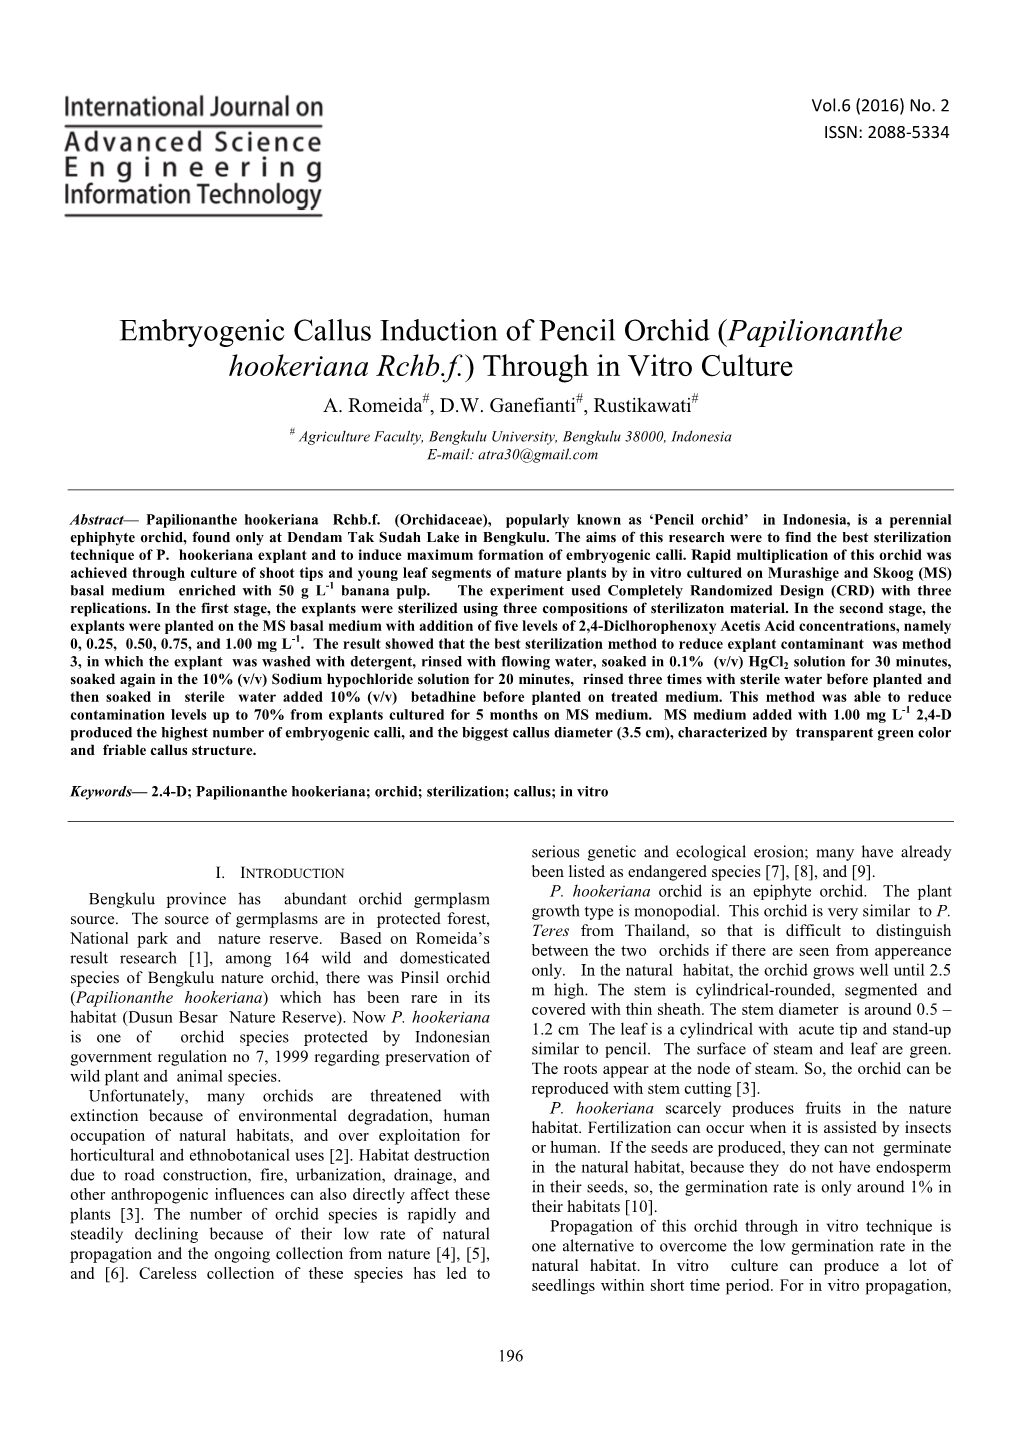 Embryogenic Callus Induction of Pencil Orchid (Papilionanthe Hookeriana Rchb.F.) Through in Vitro Culture A